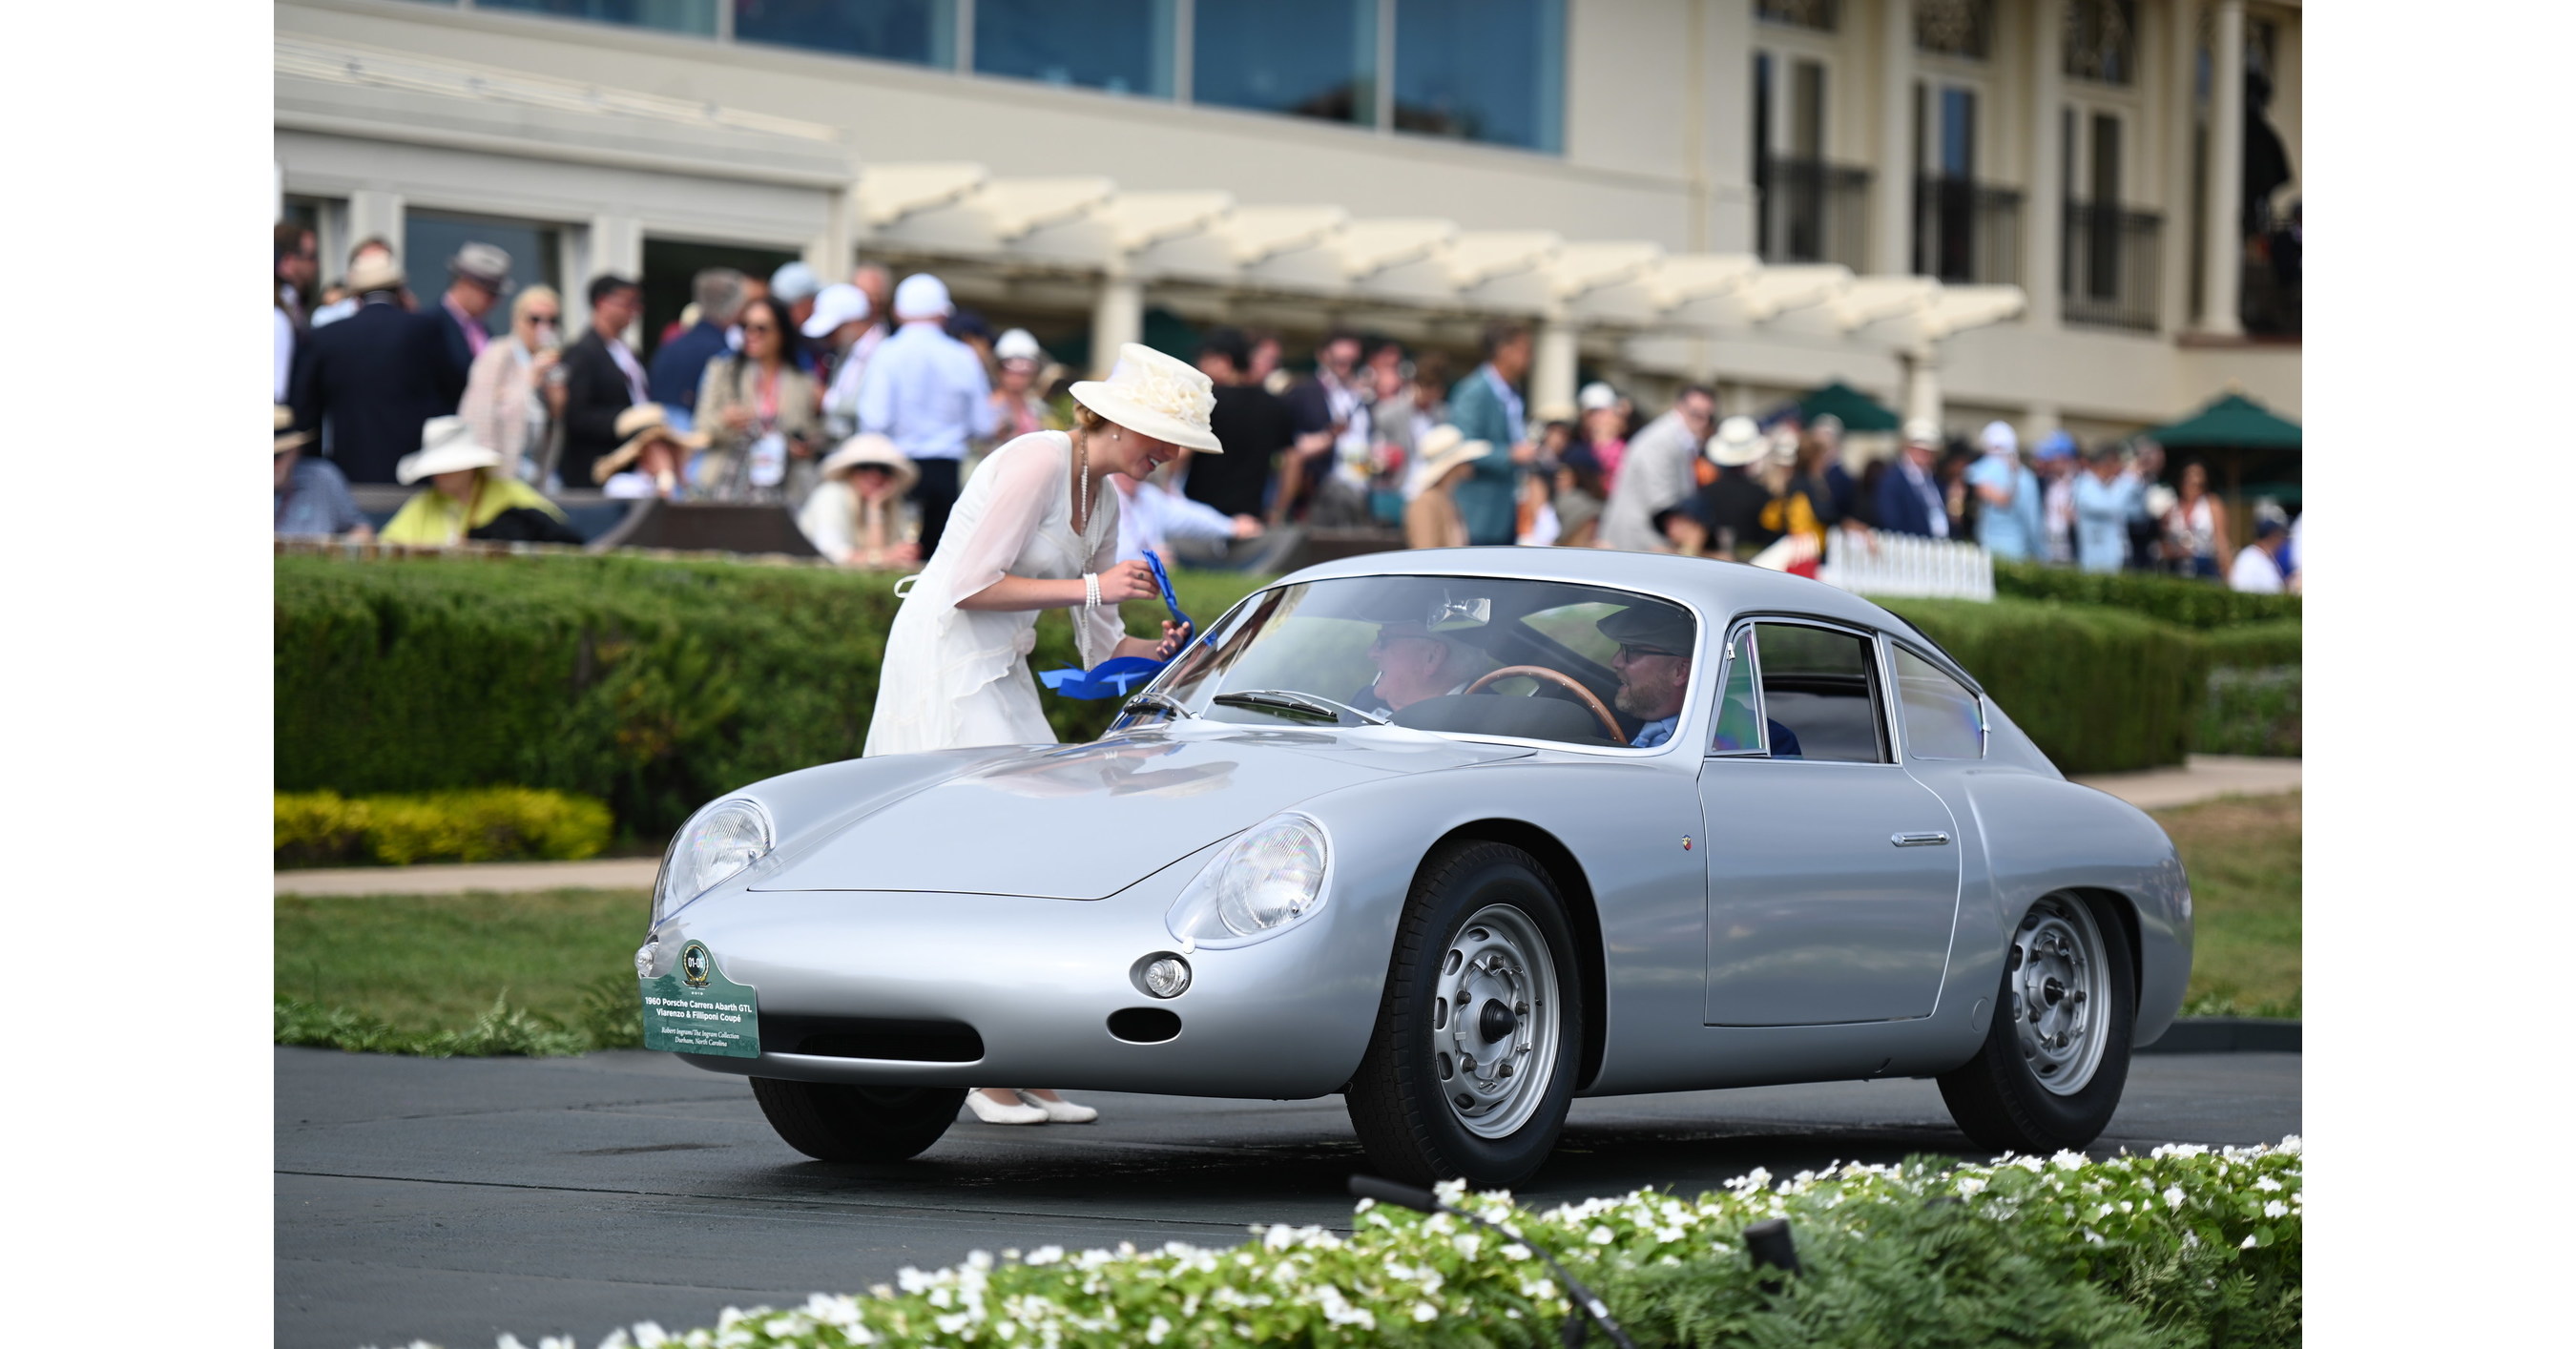 Road Scholars Places First in Class at Pebble Beach Concours d'Elegance